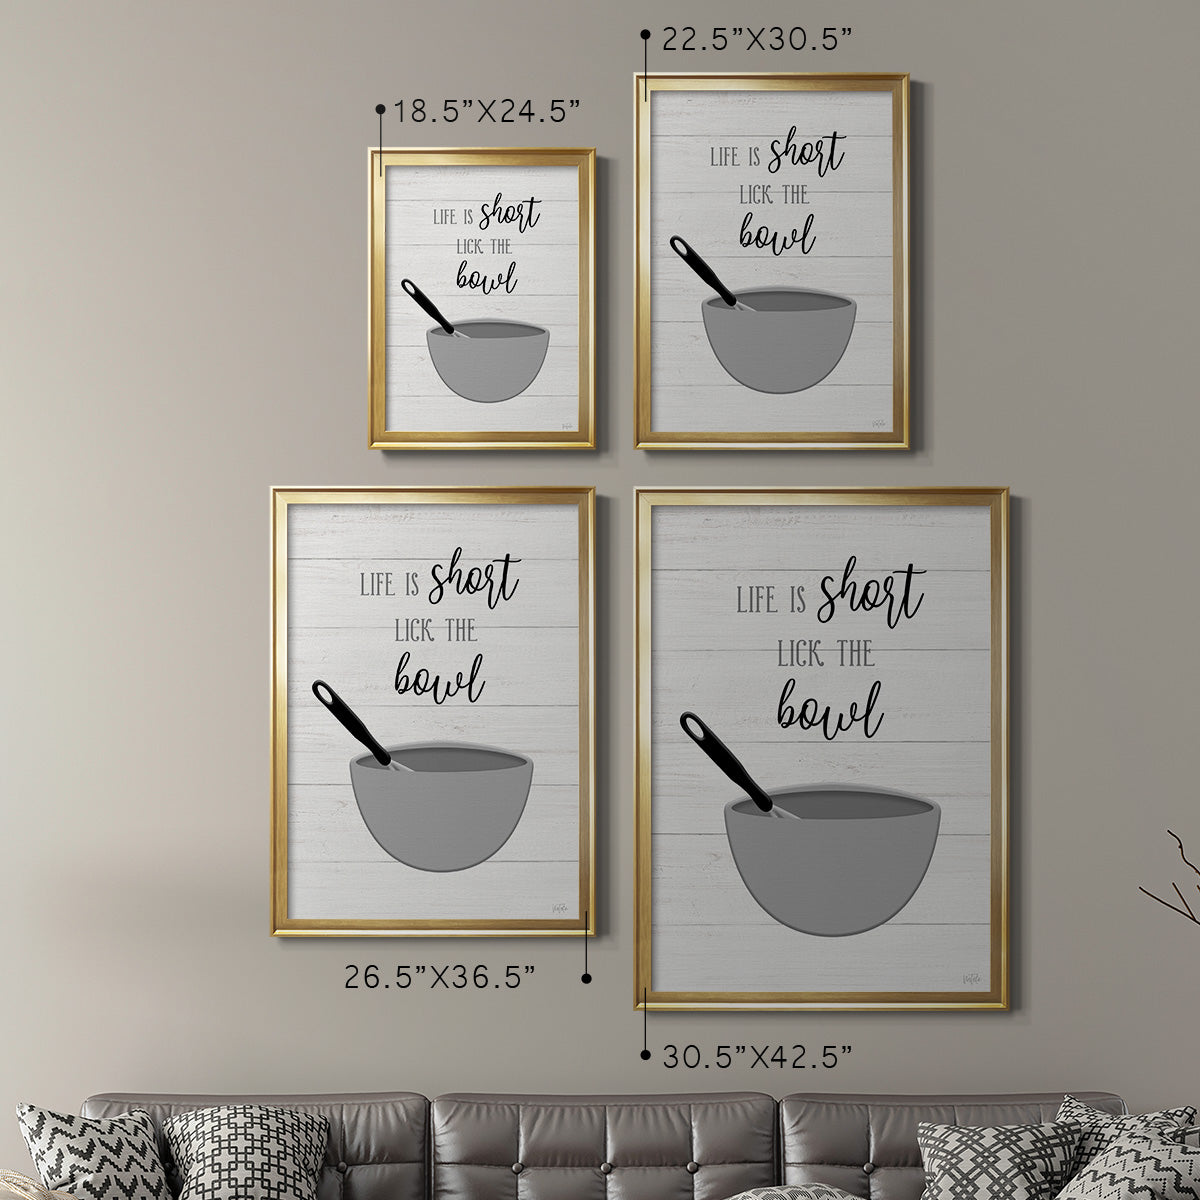 Lick the Bowl Premium Framed Print - Ready to Hang